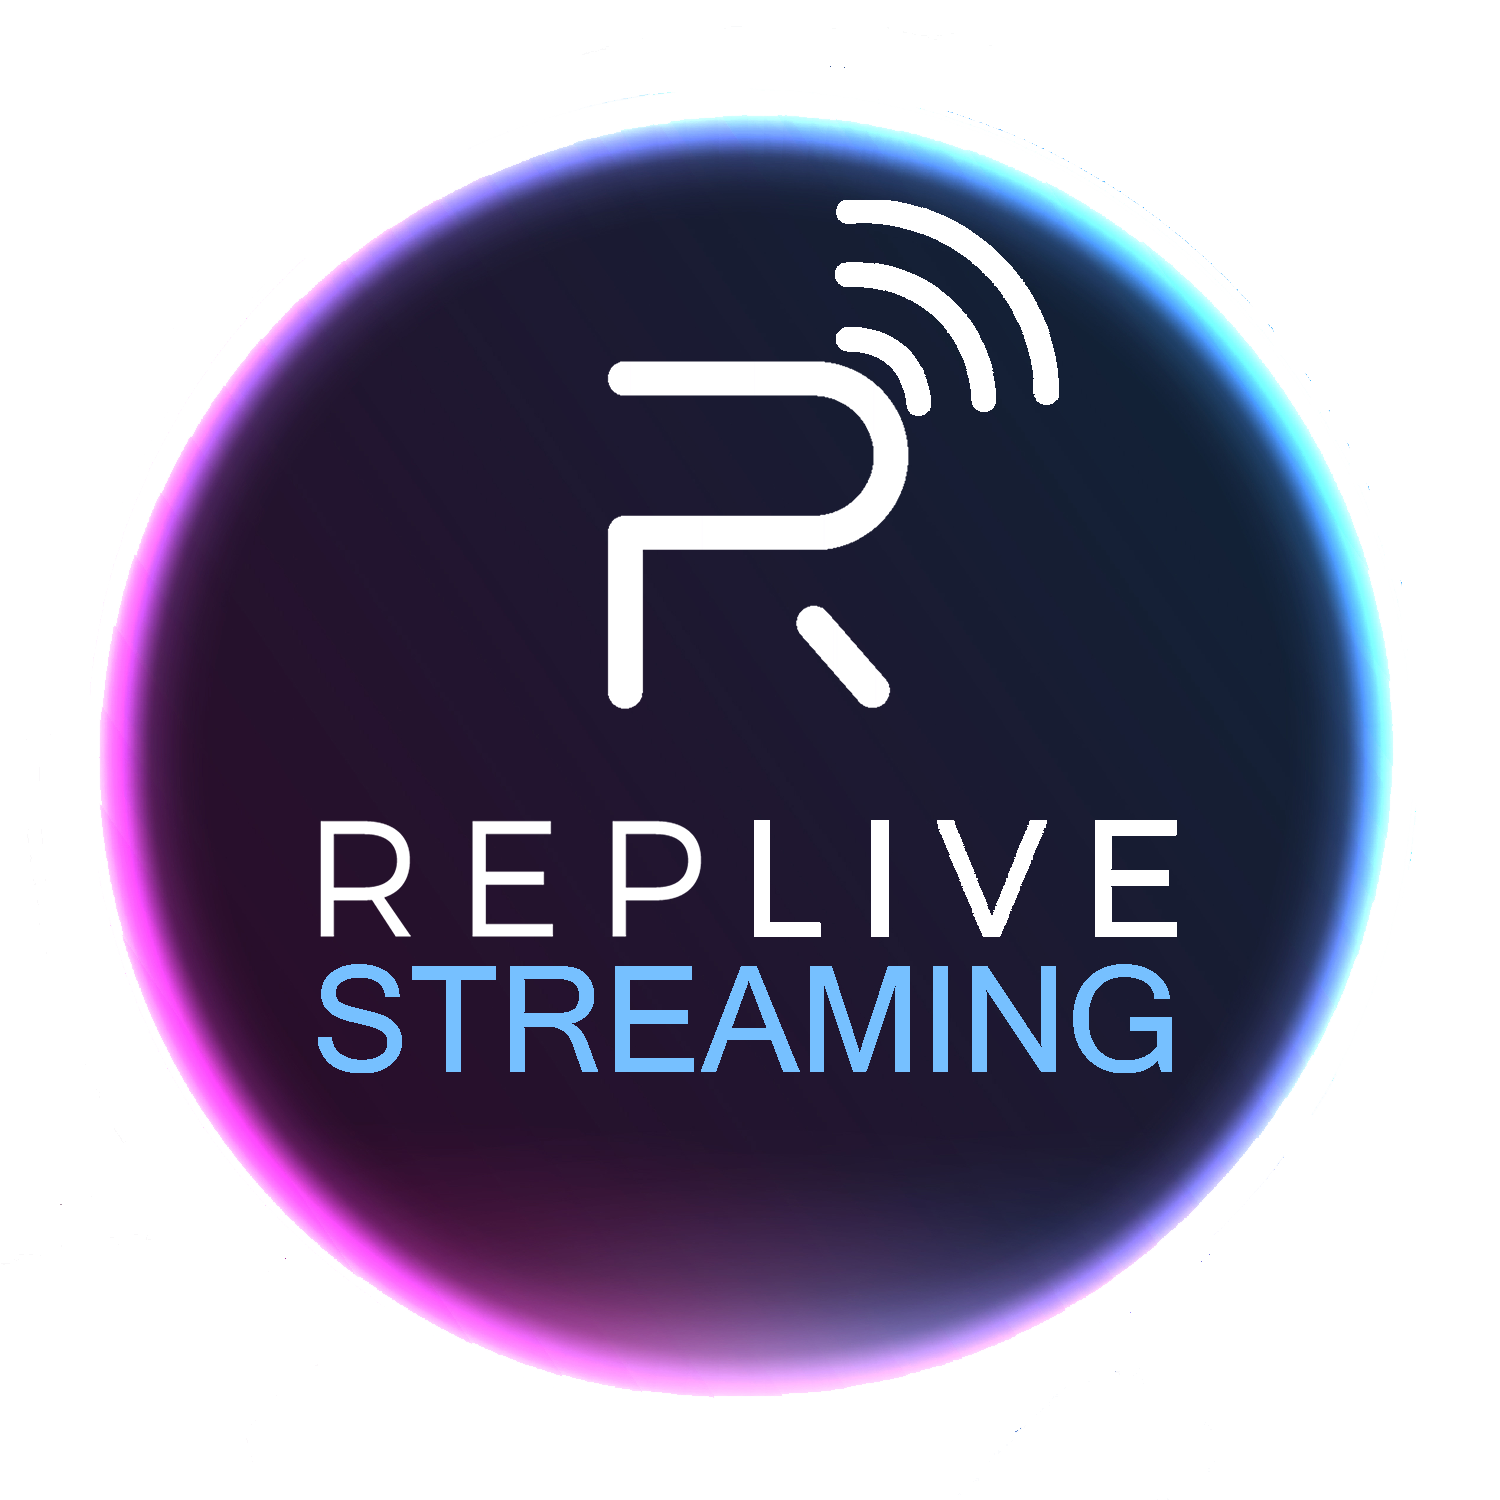 RepLive Streaming poster